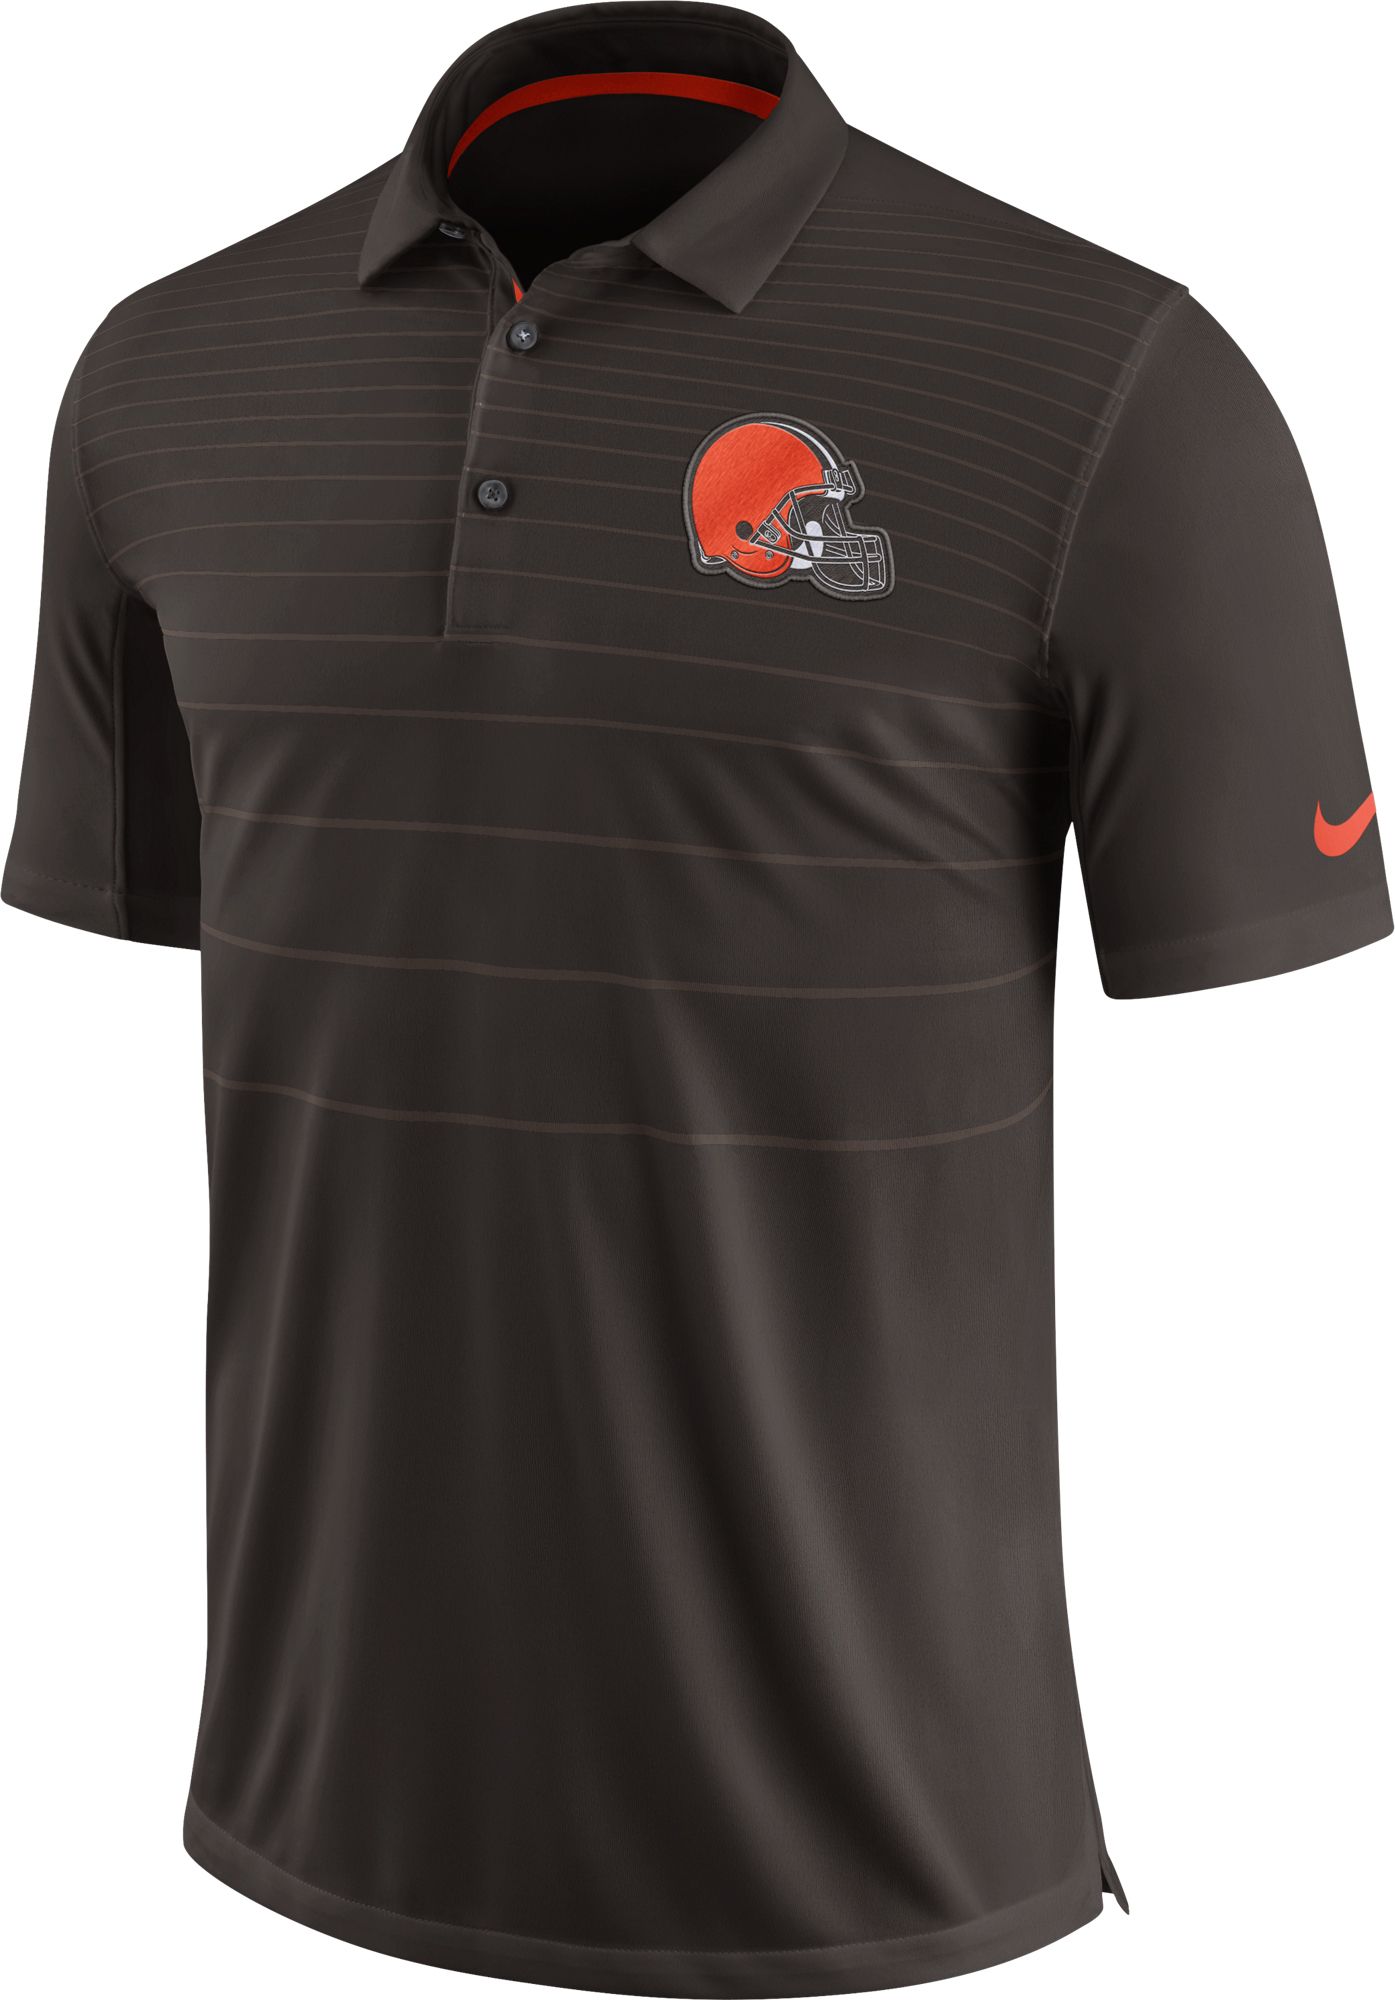 Men's Cleveland Browns NFL Apparel | DICK'S Sporting Goods